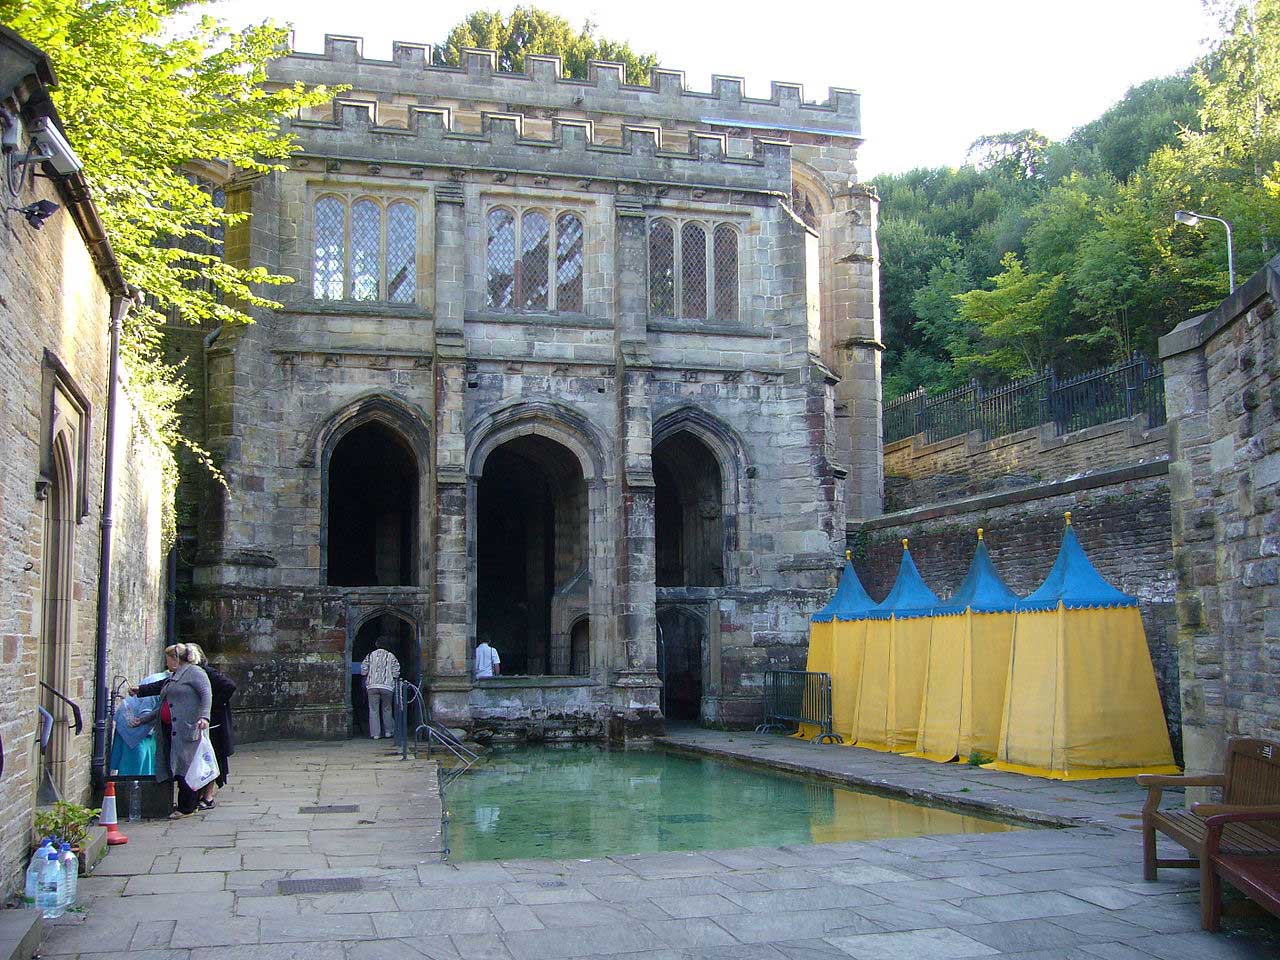 The Bathing Pool at Holywell, Wales